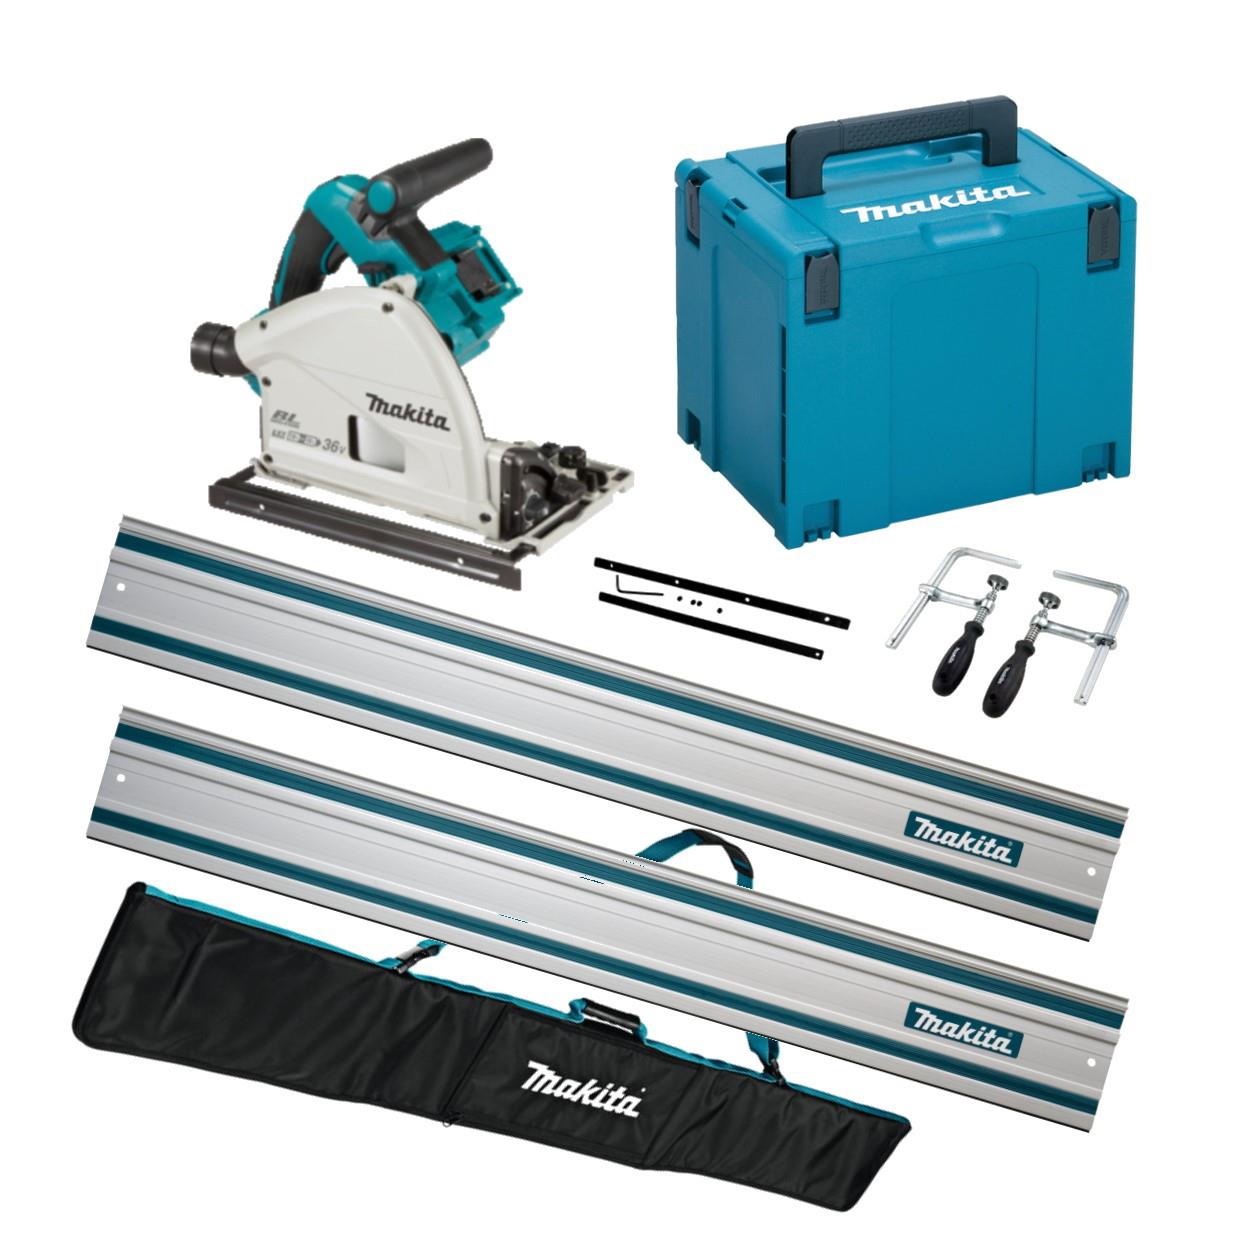 Makita DSP600ZJ Twin 18 Volt Cordless Plunge Saw; Brushless; 2 x 199141-8 1500mm Plunge Saw Guide Rails; 1 x 198885-7 Rail Connector Set; 194385-5 Guide Rail Clamp Set; Rail Bag